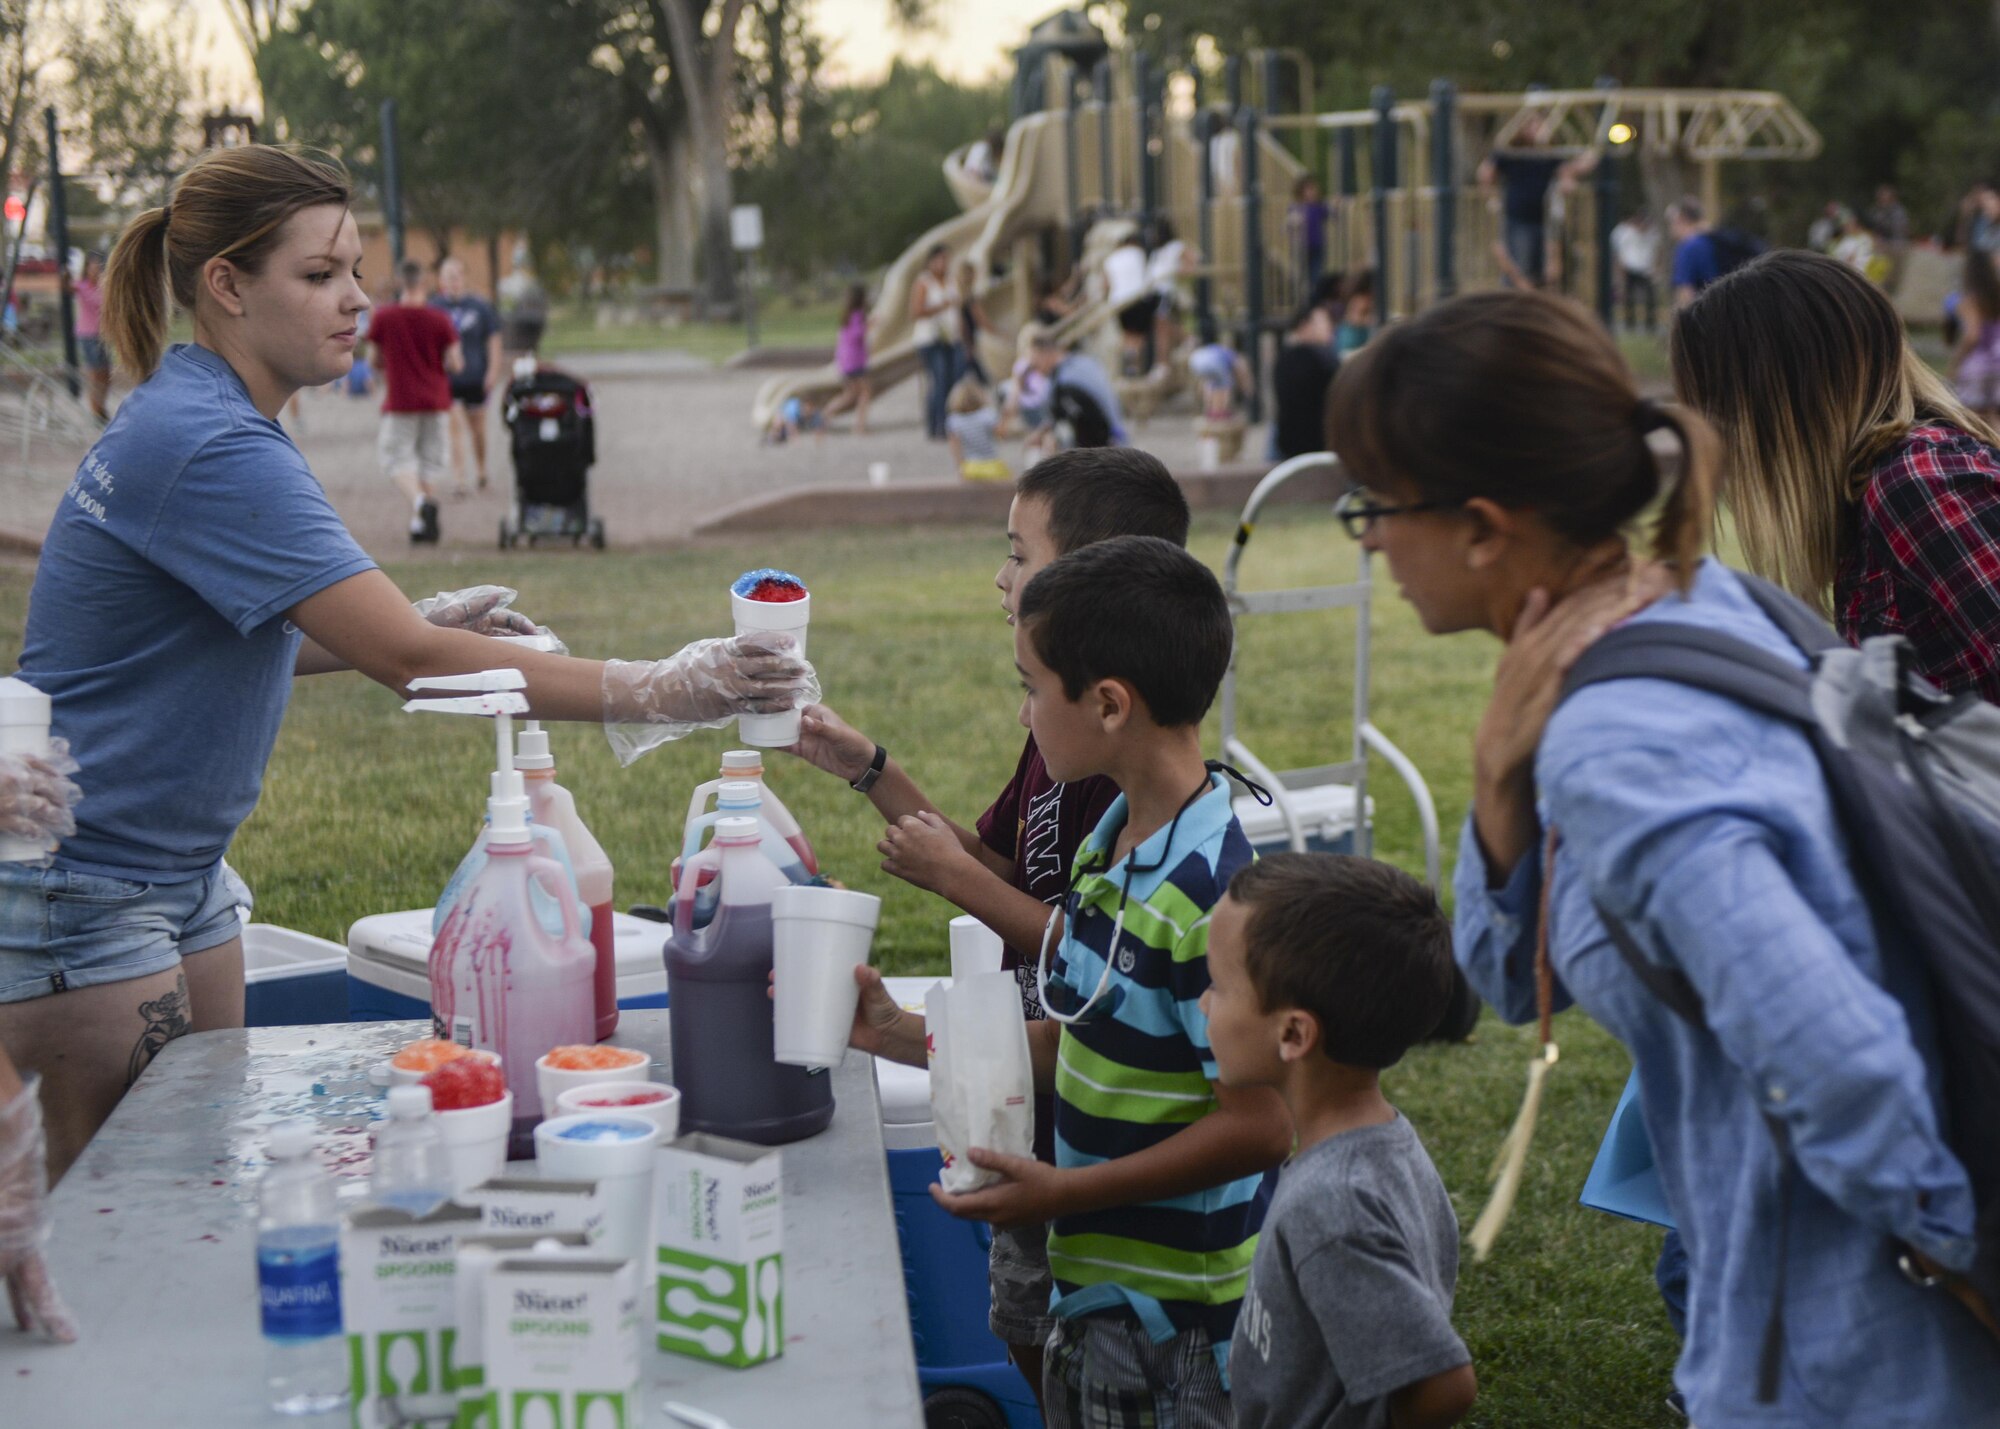 A Holloman volunteer serves a cup of shaved ice at the annual Zoo After Hours event at Alameda Park Zoo in Alamogordo, N.M. on Sept. 24, 2016. Pizza and snack foods, including shaved ice and popcorn, were free to attendees of the event. (U.S. Air Force photo by Airman 1st Class Alexis P. Docherty)